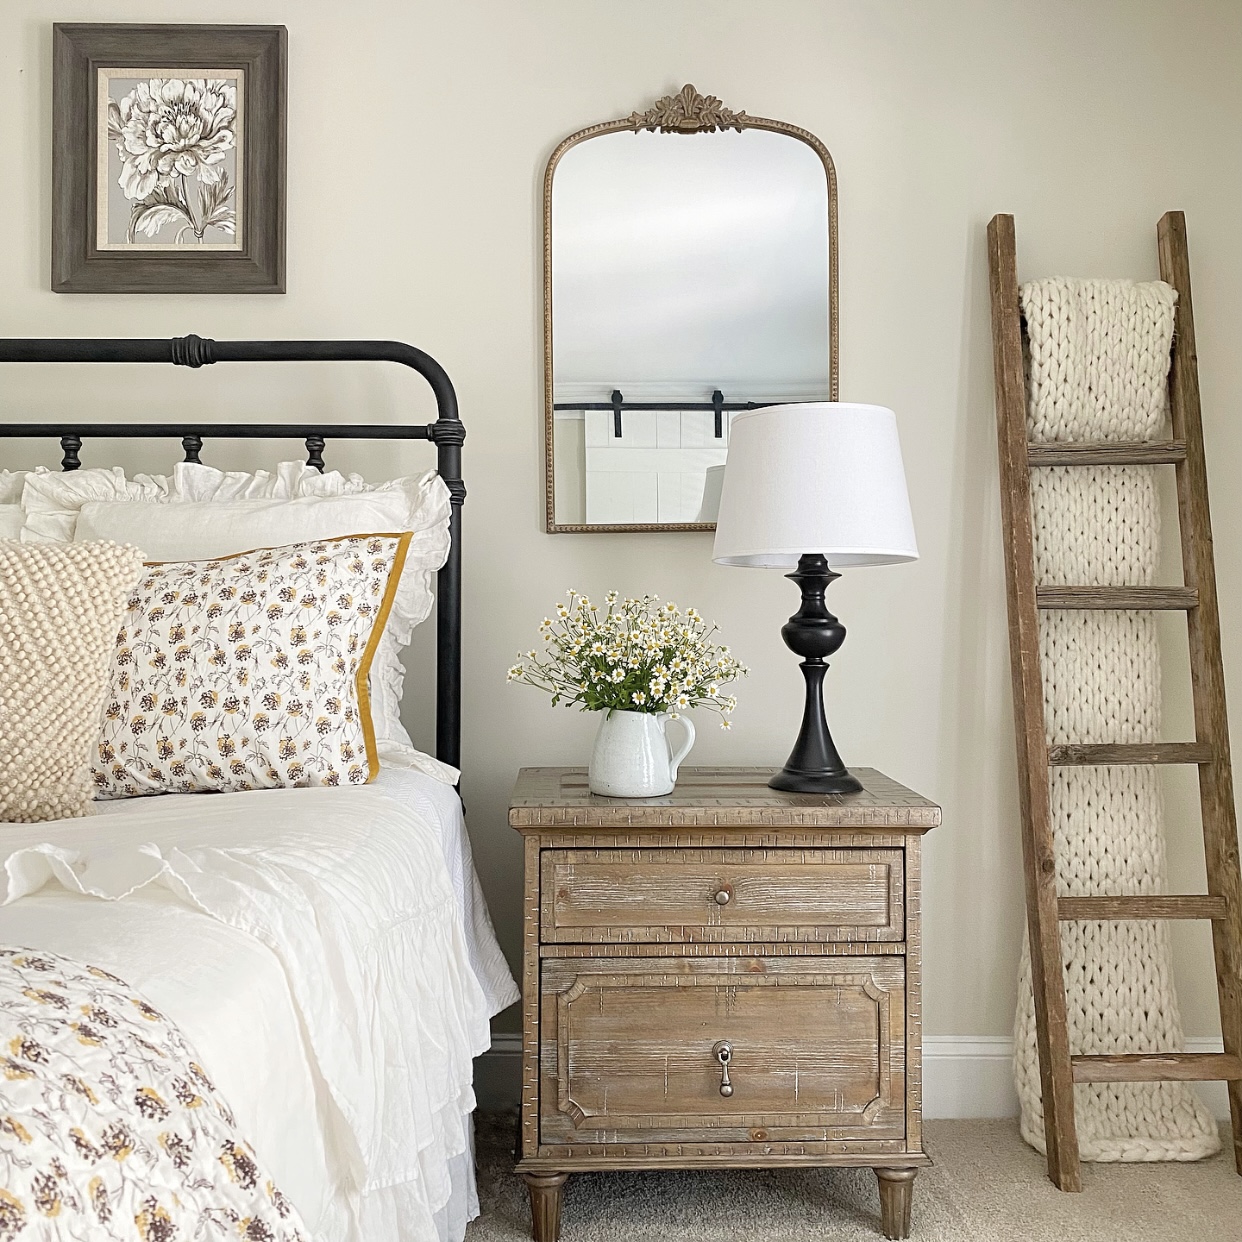 Summer Farmhouse Bedroom Inspiration including linens, a nightstand, flowers, a lamp, a mirror and a rustic blanket ladder.